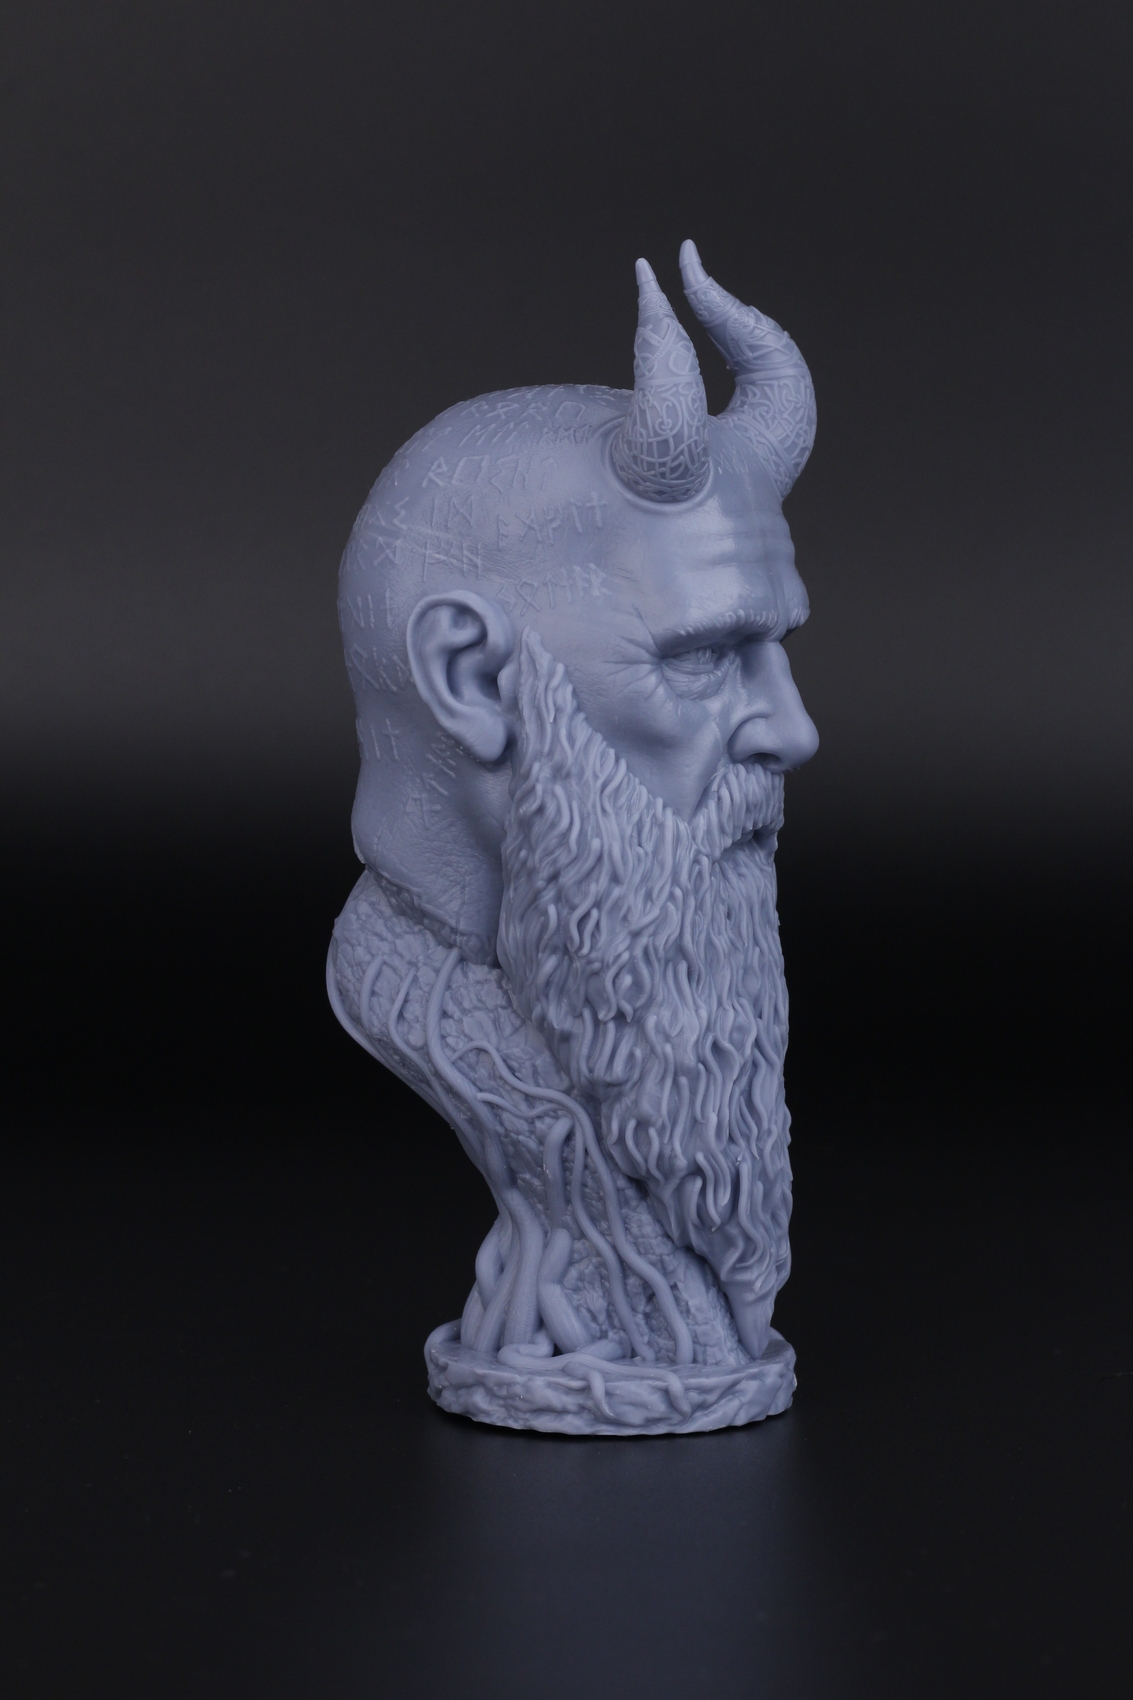 Mimir Bust from Fotis Mint printed on Anycubic Photon M32 | Anycubic Photon M3 Review: Bridging the gap